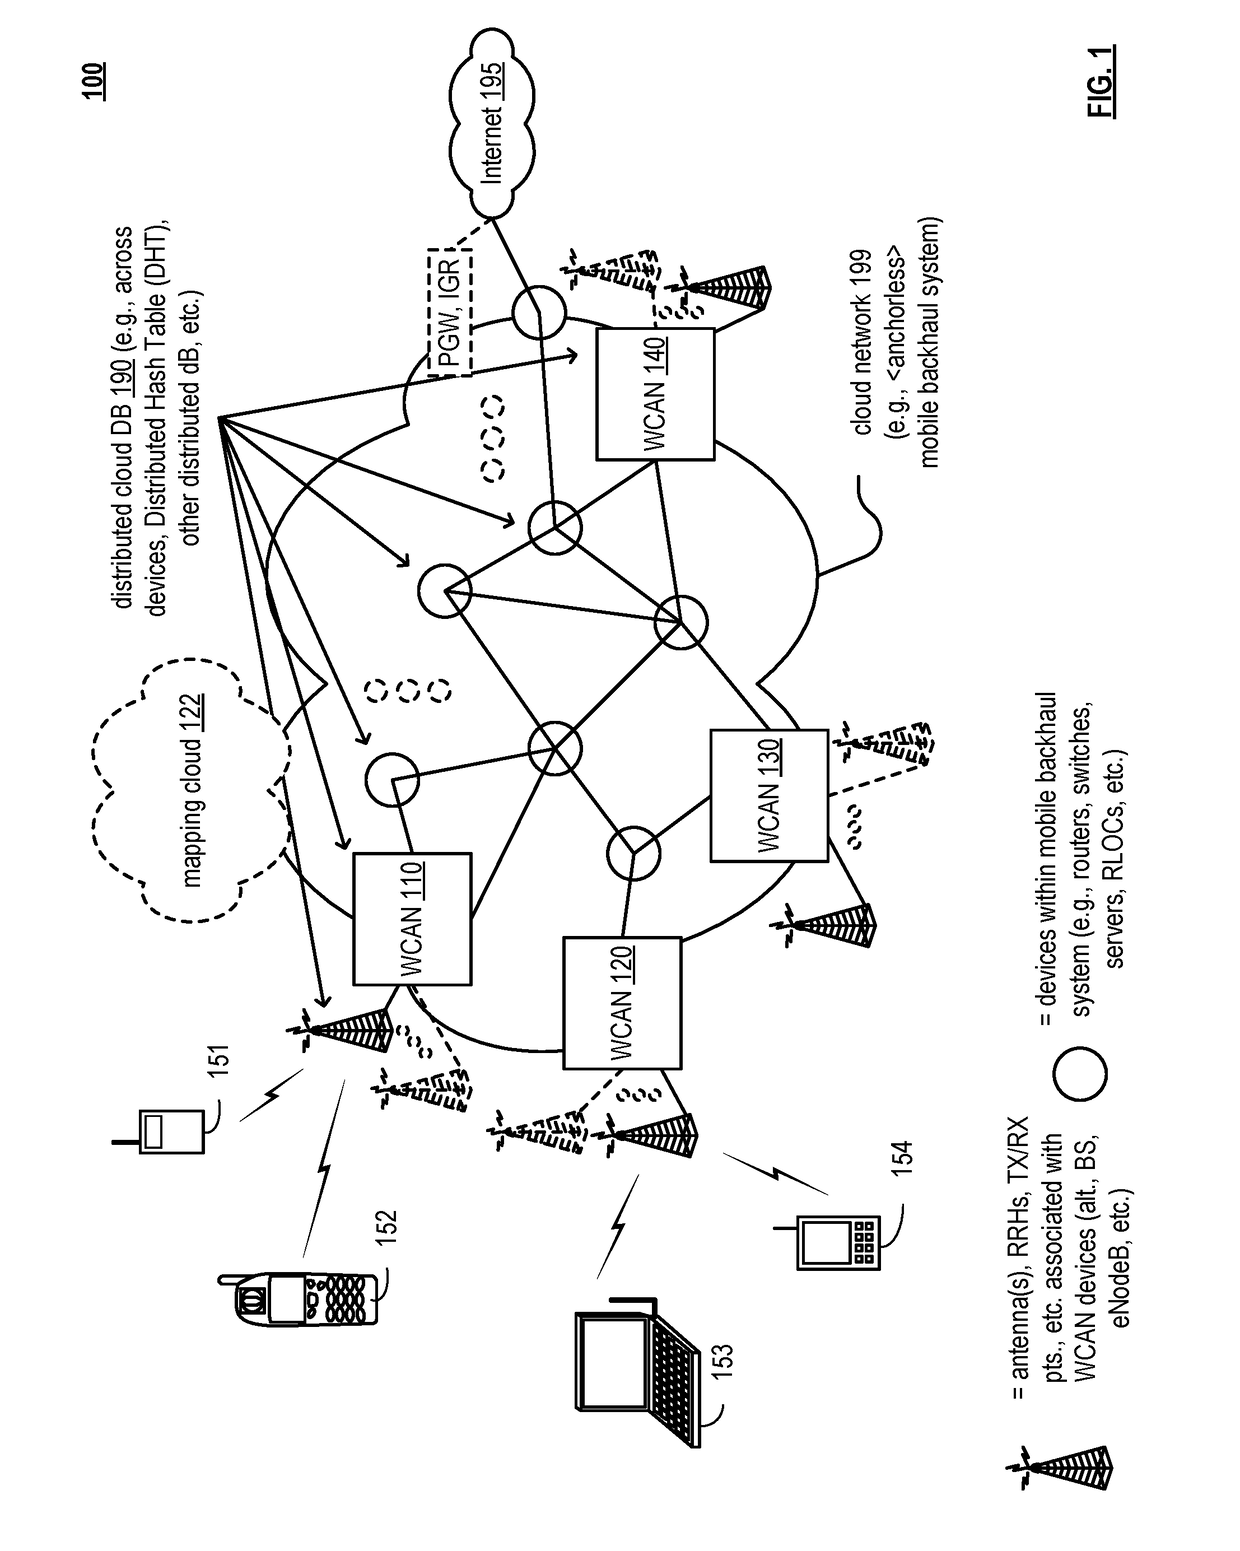 Wireless communication access node (WCAN) device based policy enforcement and statistics collection in anchorless communication systems